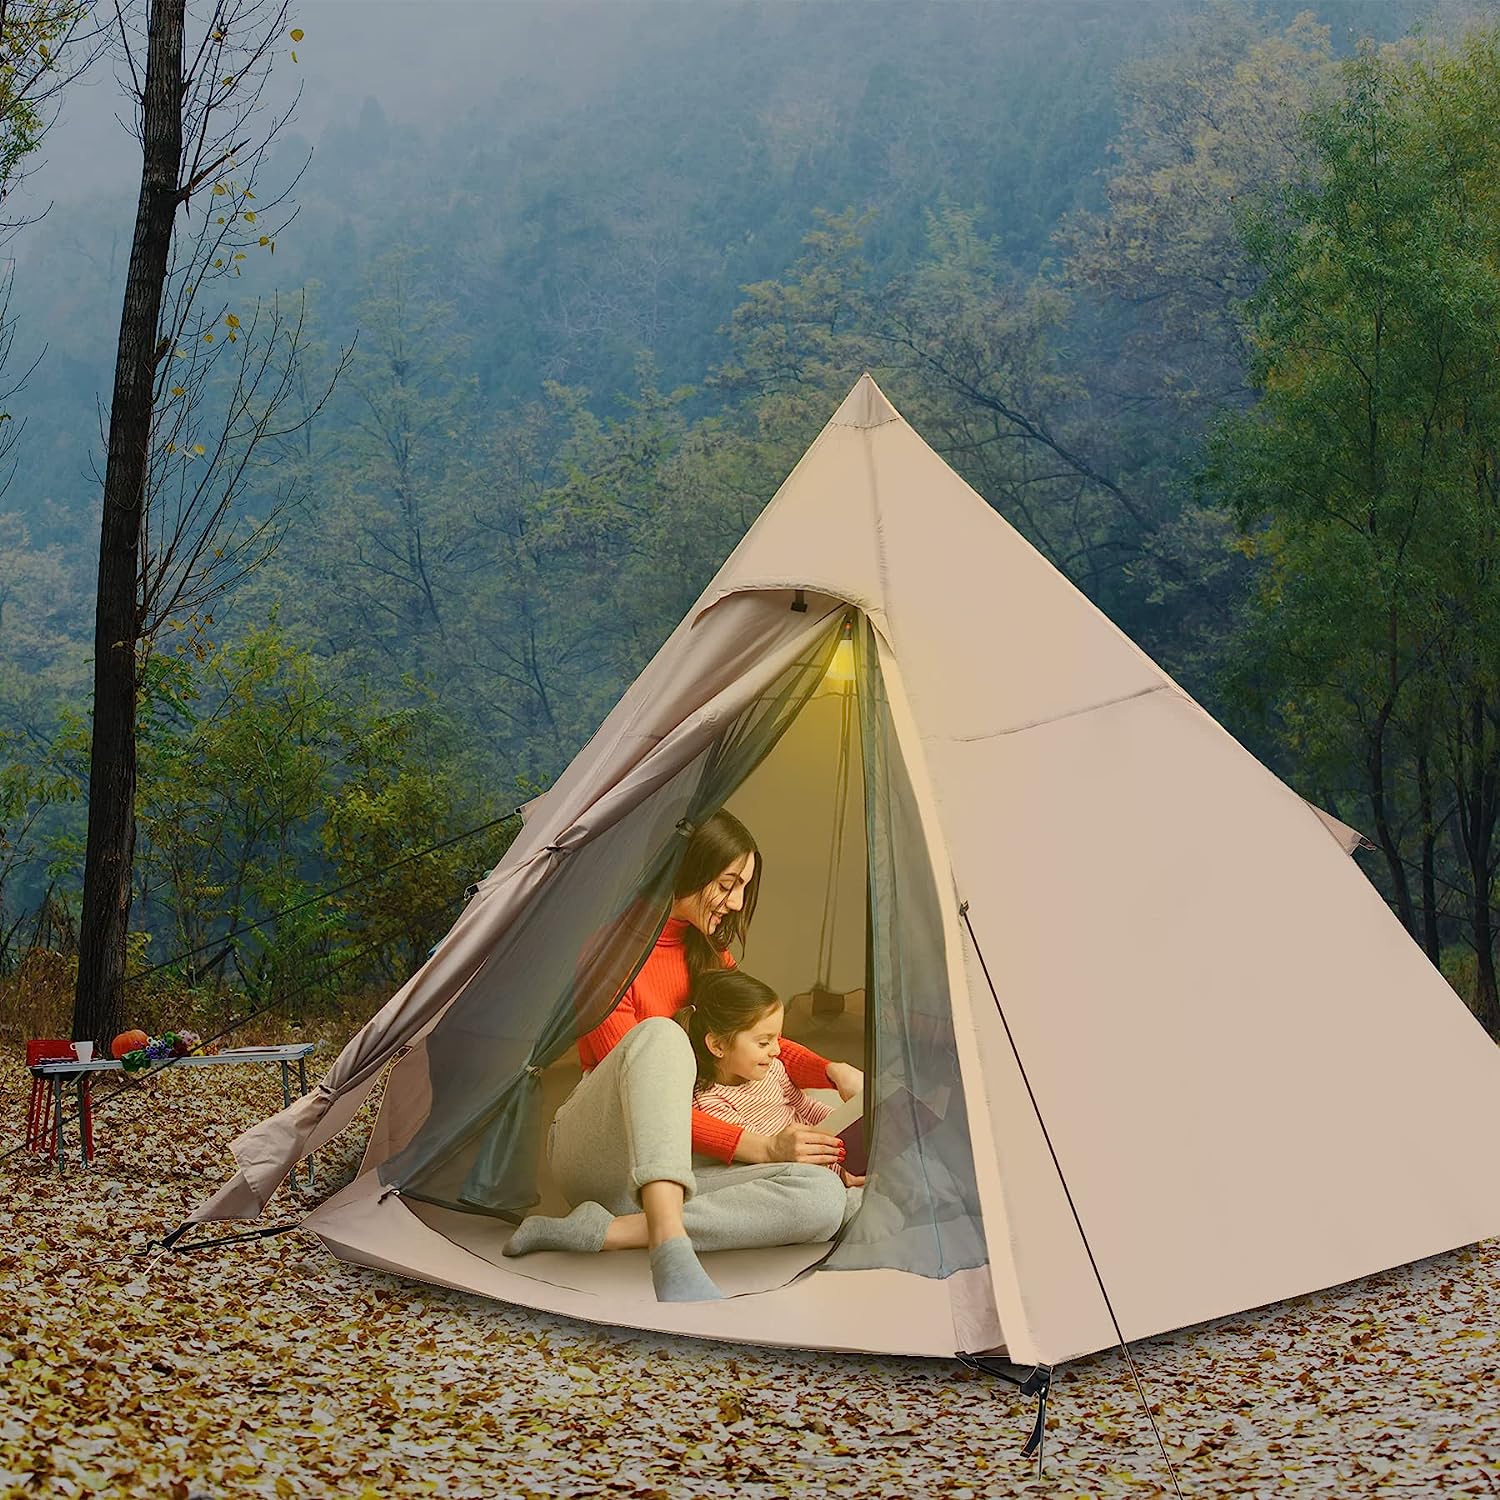 Redcamp Pyramid Tent Teepee Tent Outdoor